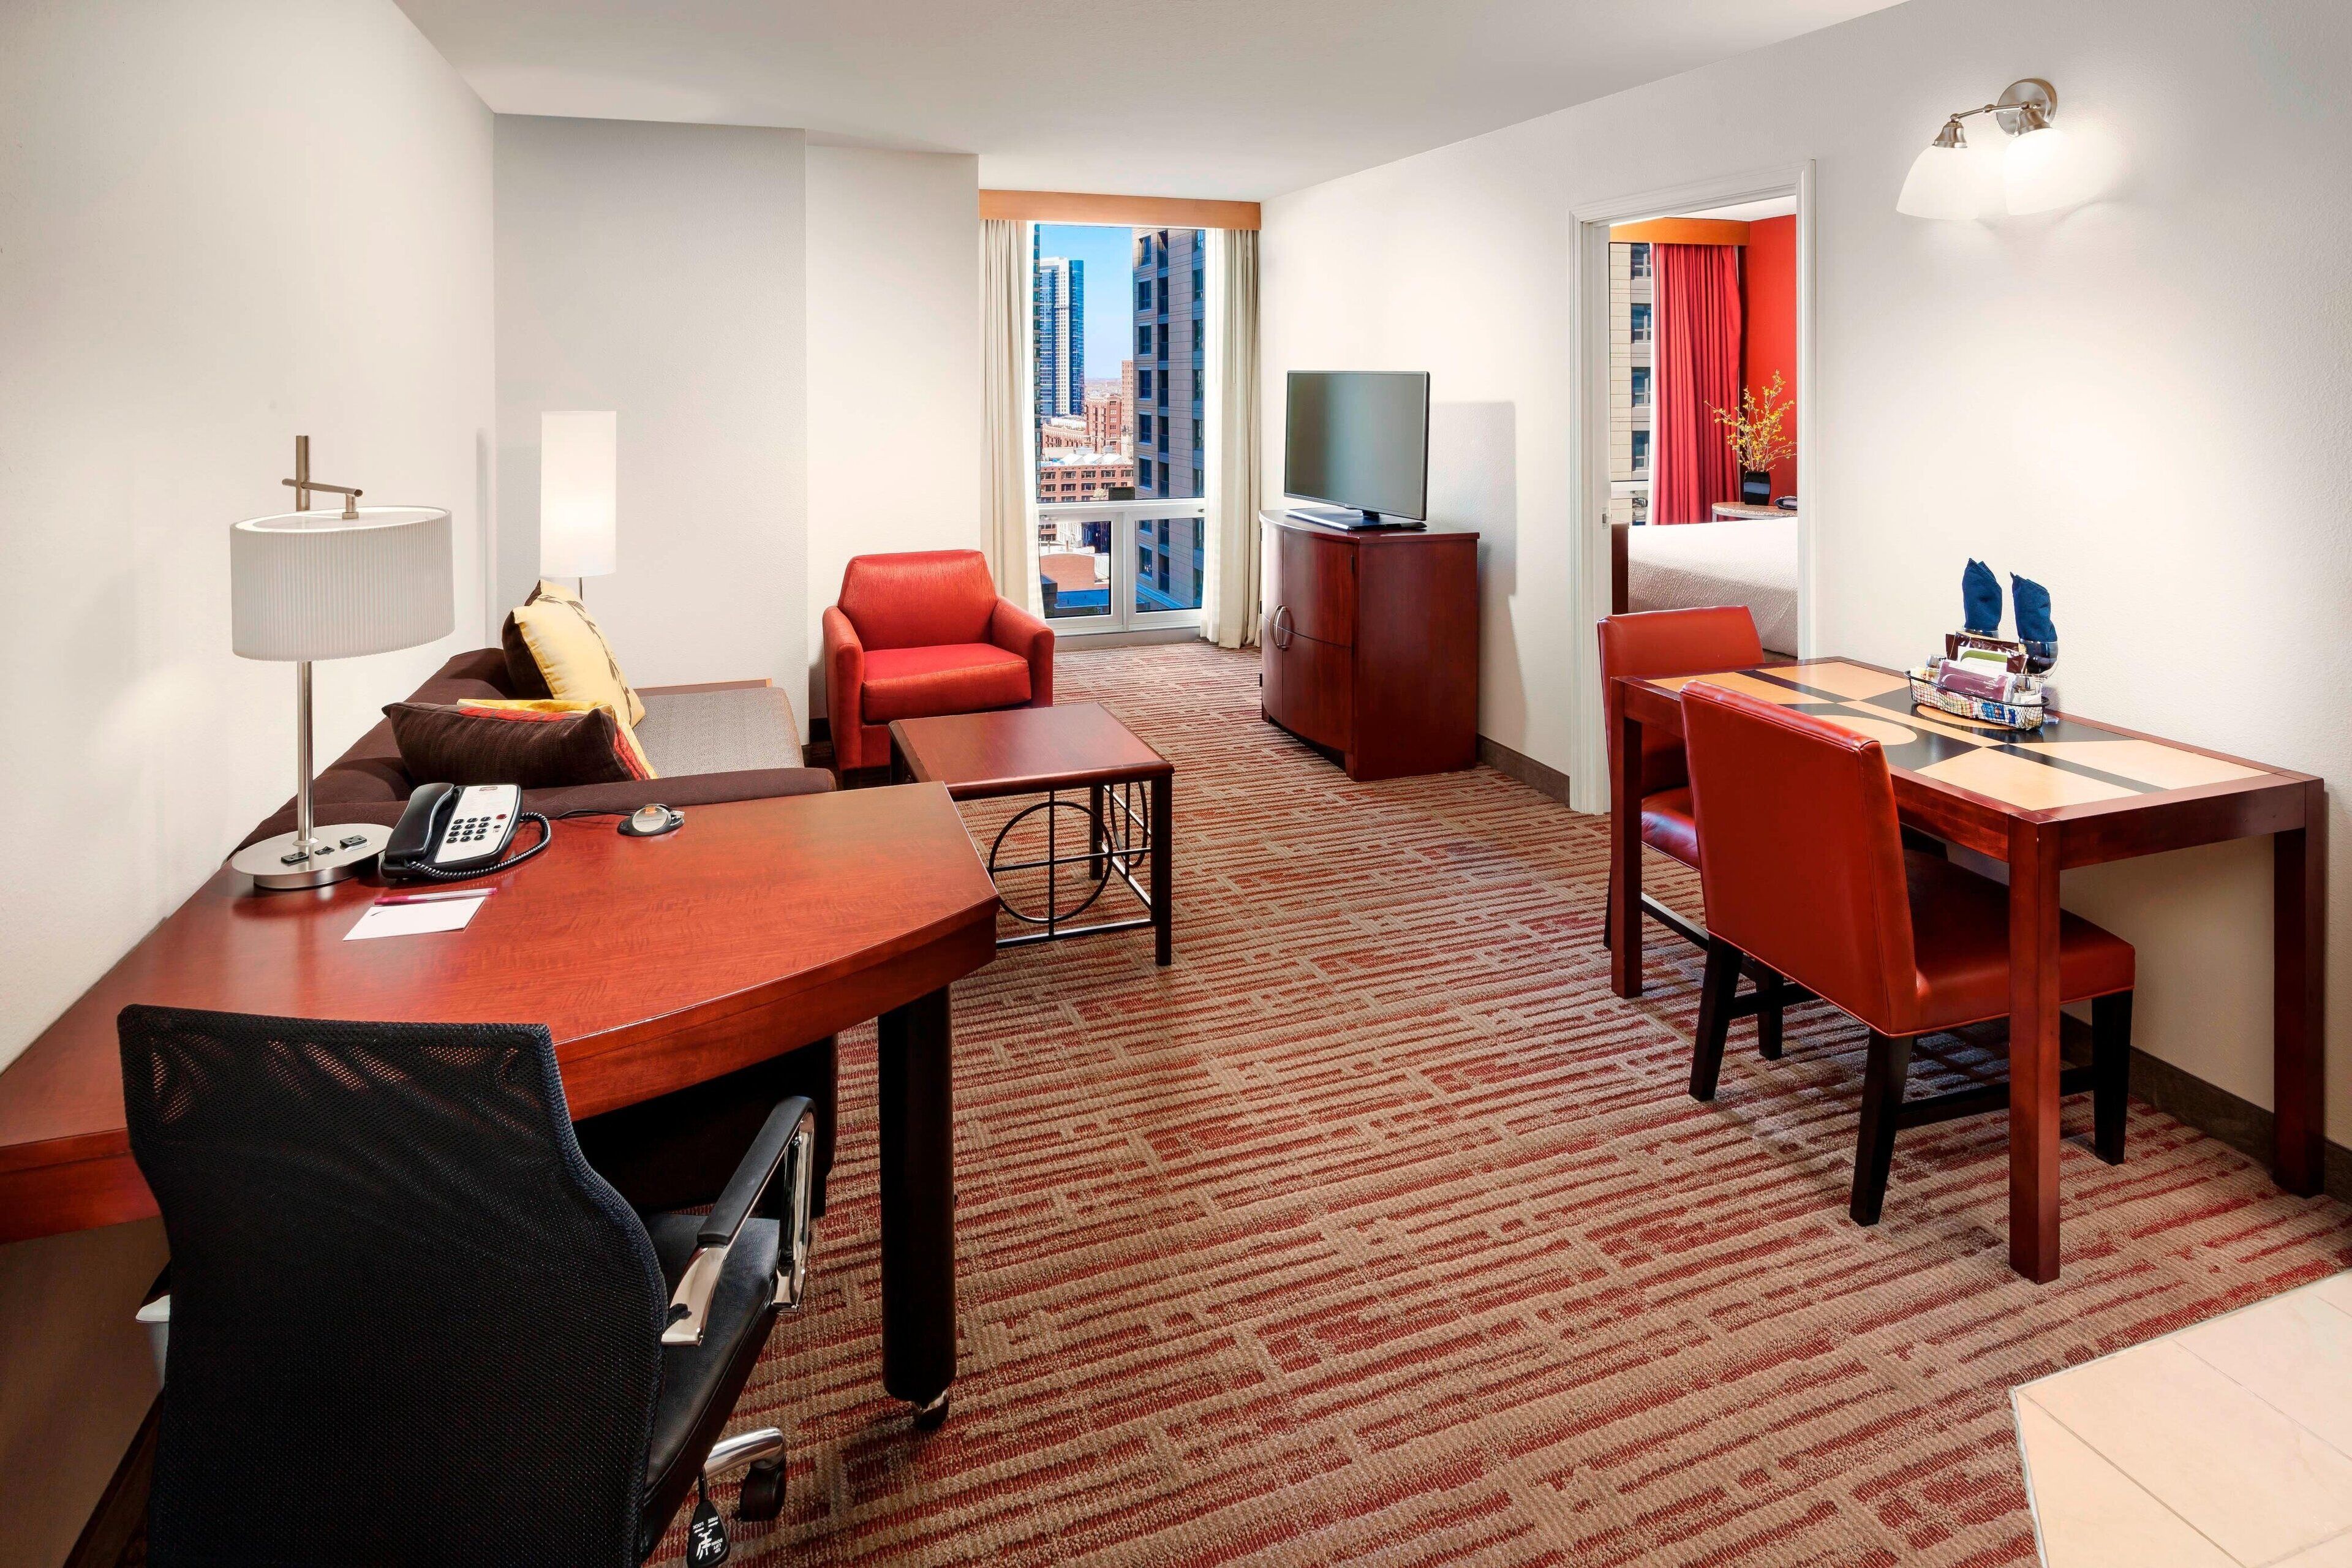 Residence Inn Chicago Downtown/River North